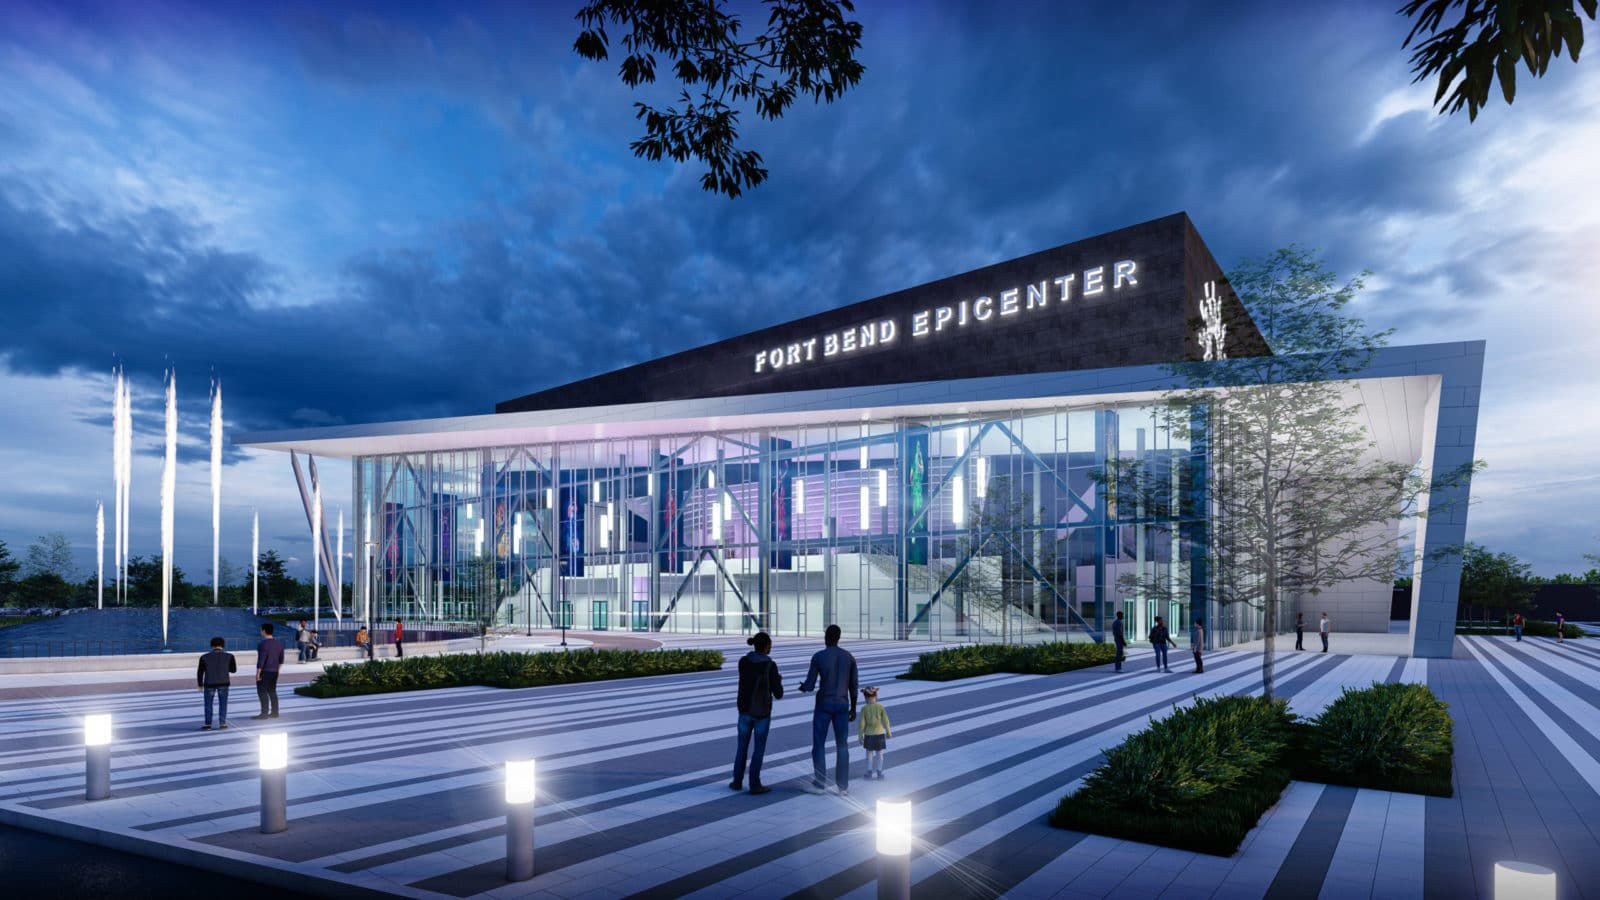 Rendering of the Fort Bend Epicenter, Fort Bend County's newest event center